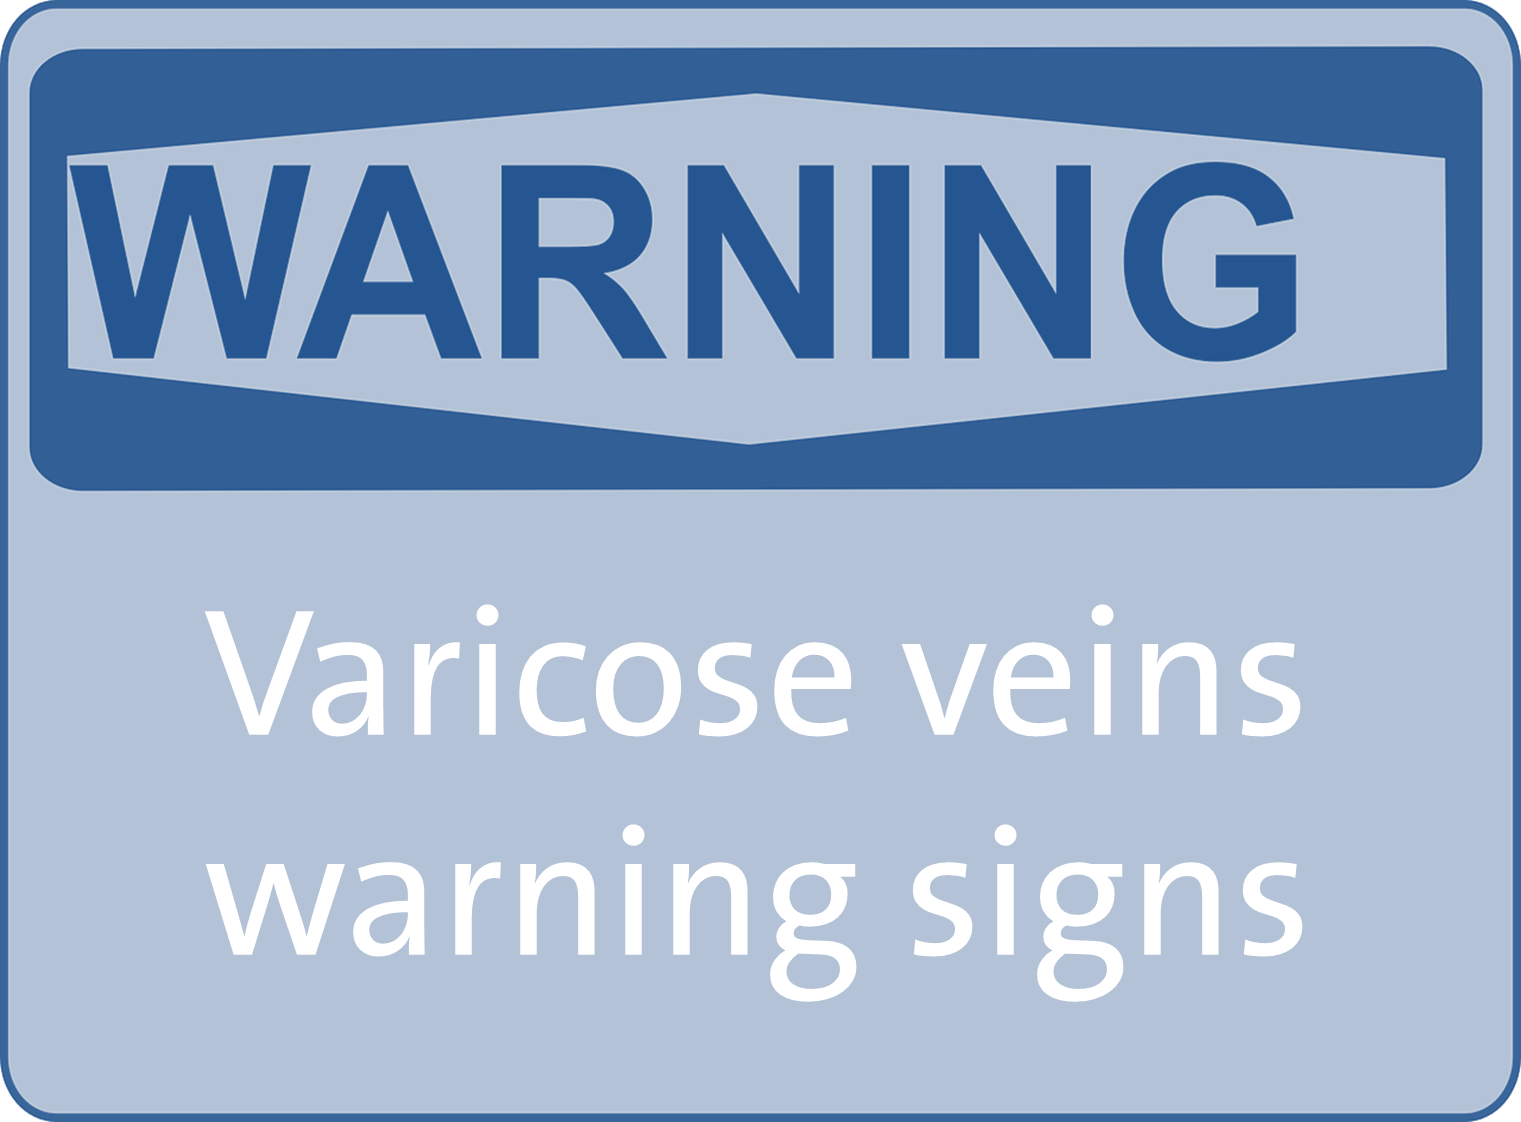 Keep your eye out for the following warning signs…